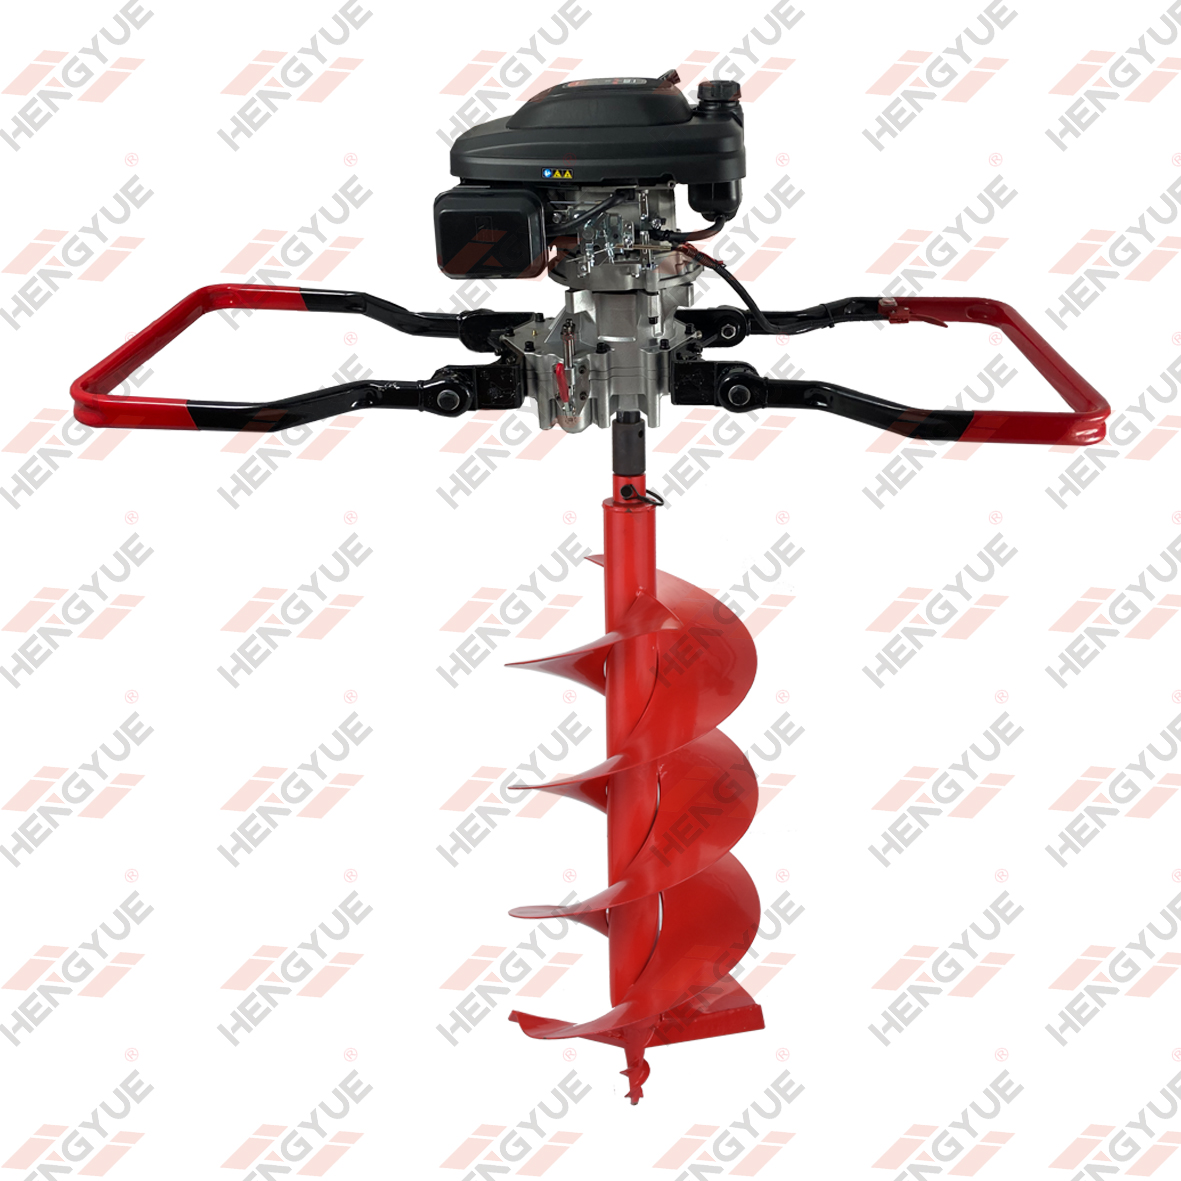 Powered by HONDA GXV160 ,Reverse Function Earth Auger 